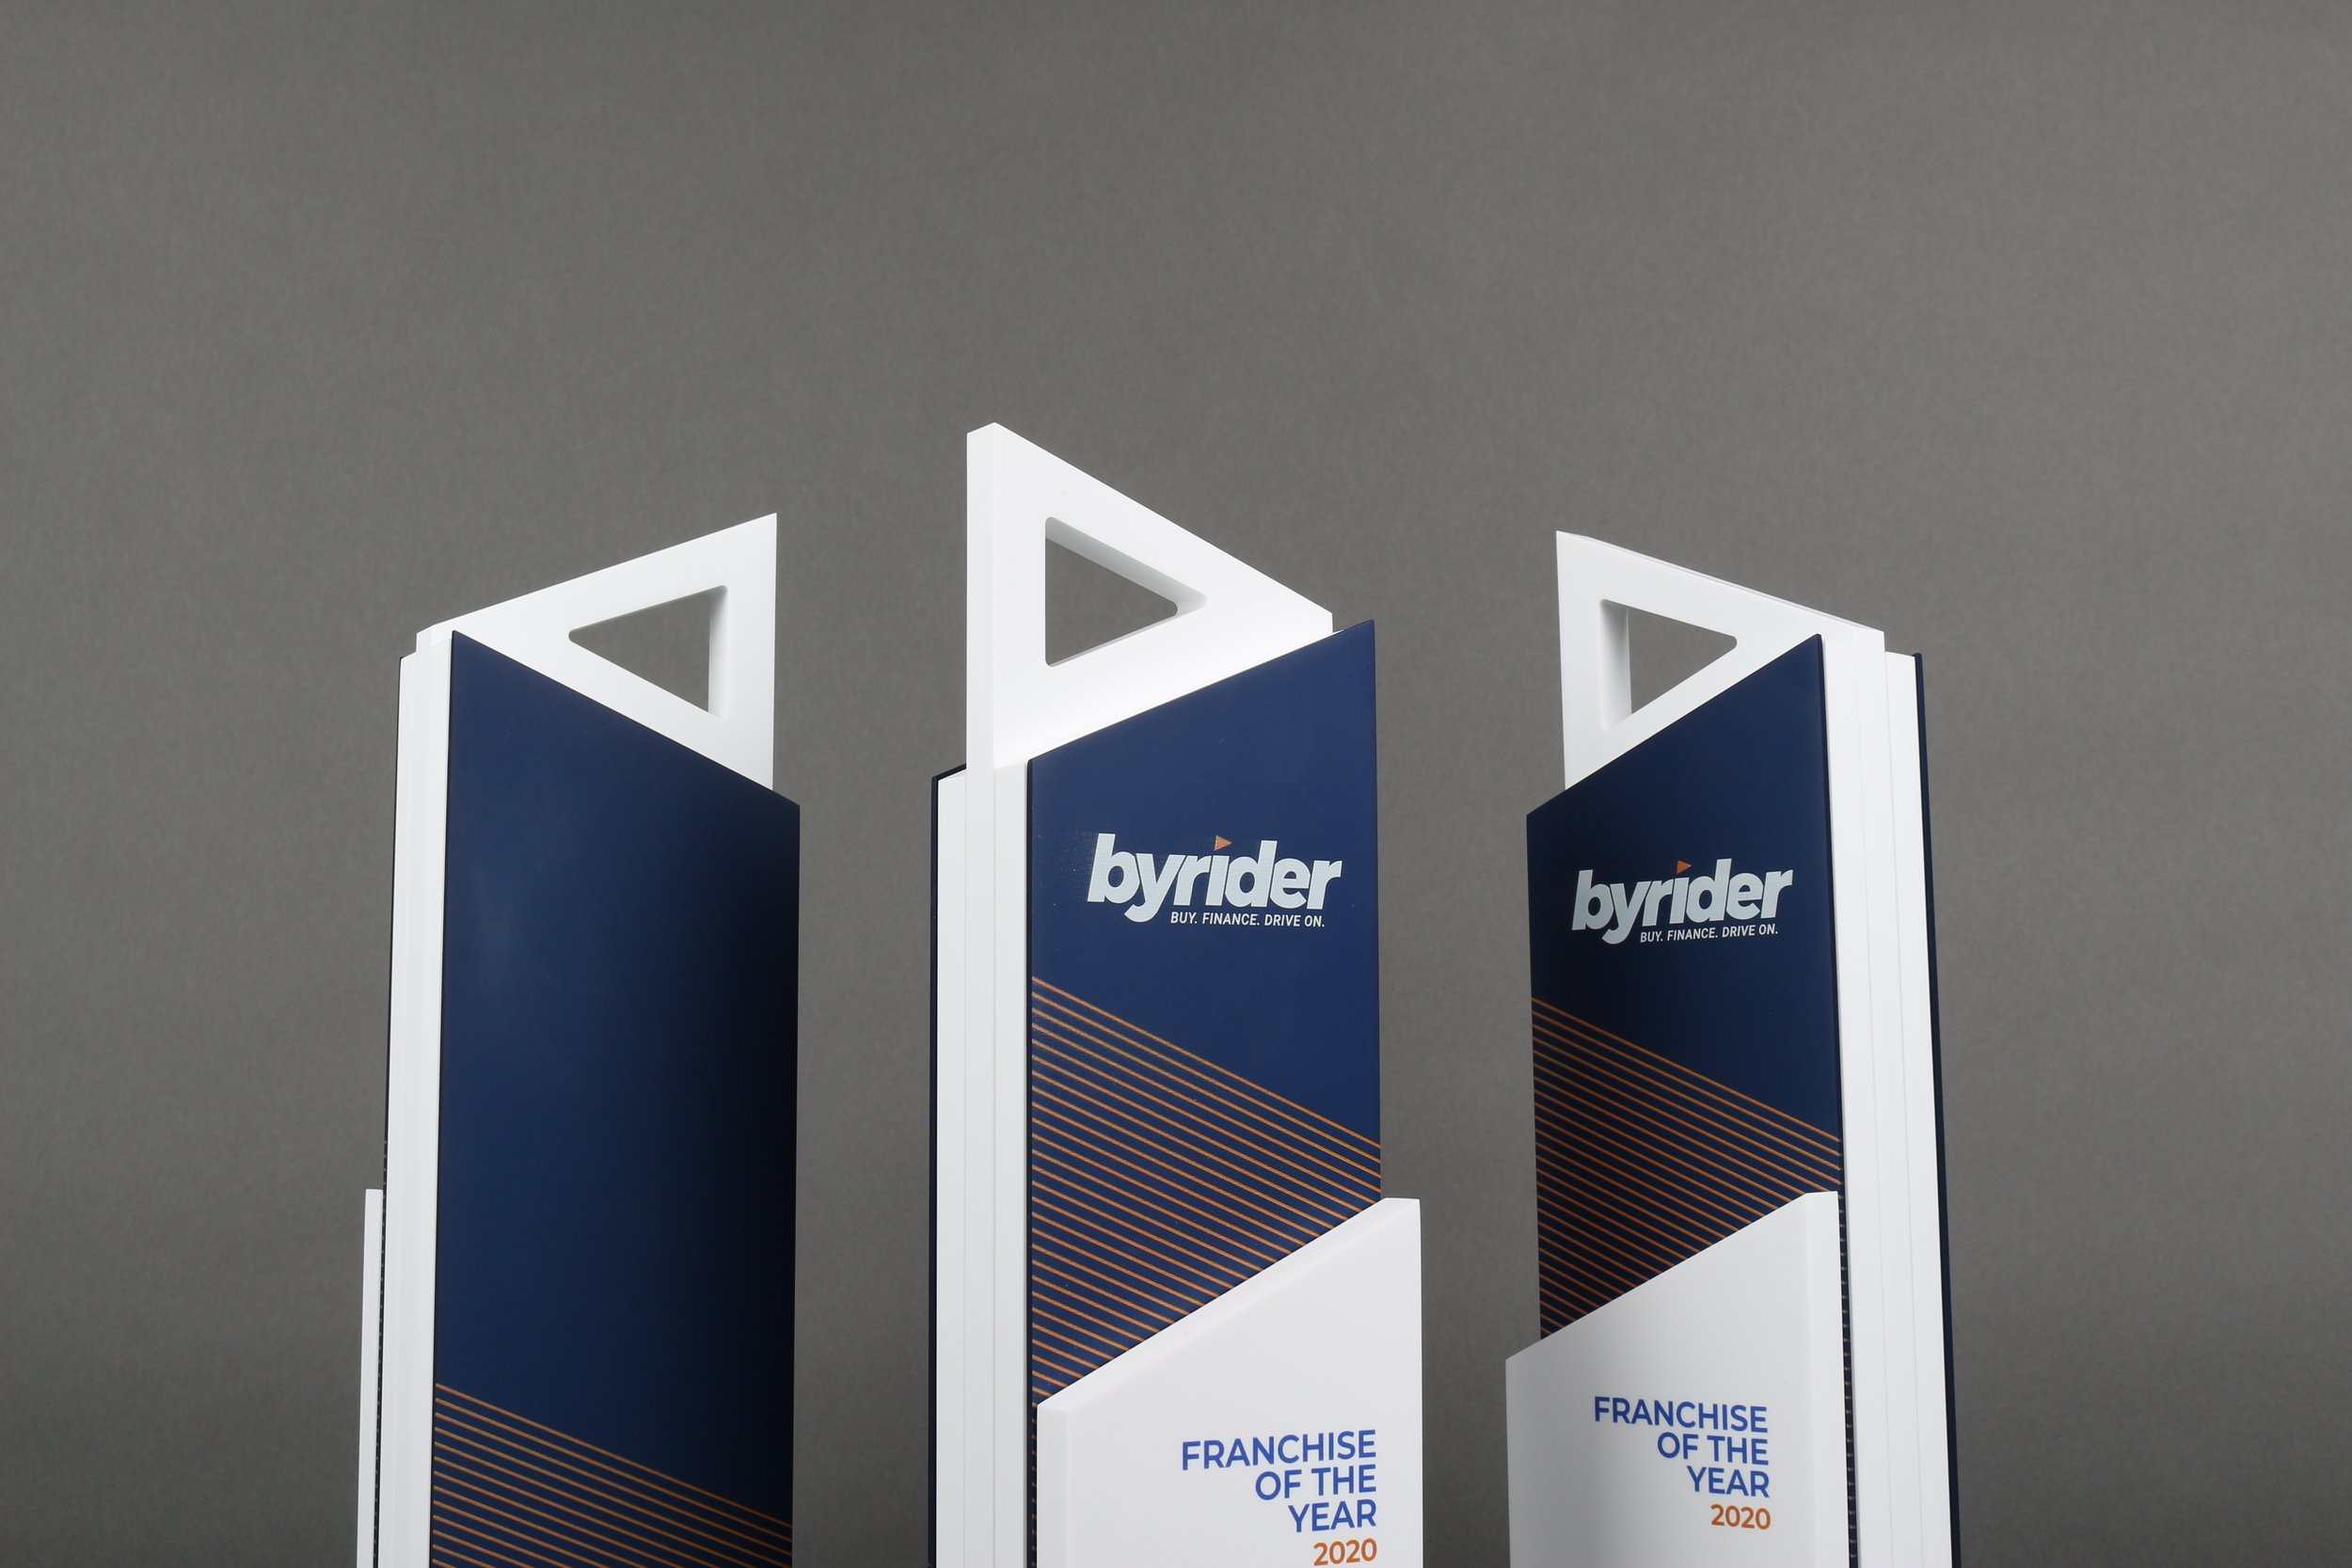 byrider annual conference awards custom design wow factor 